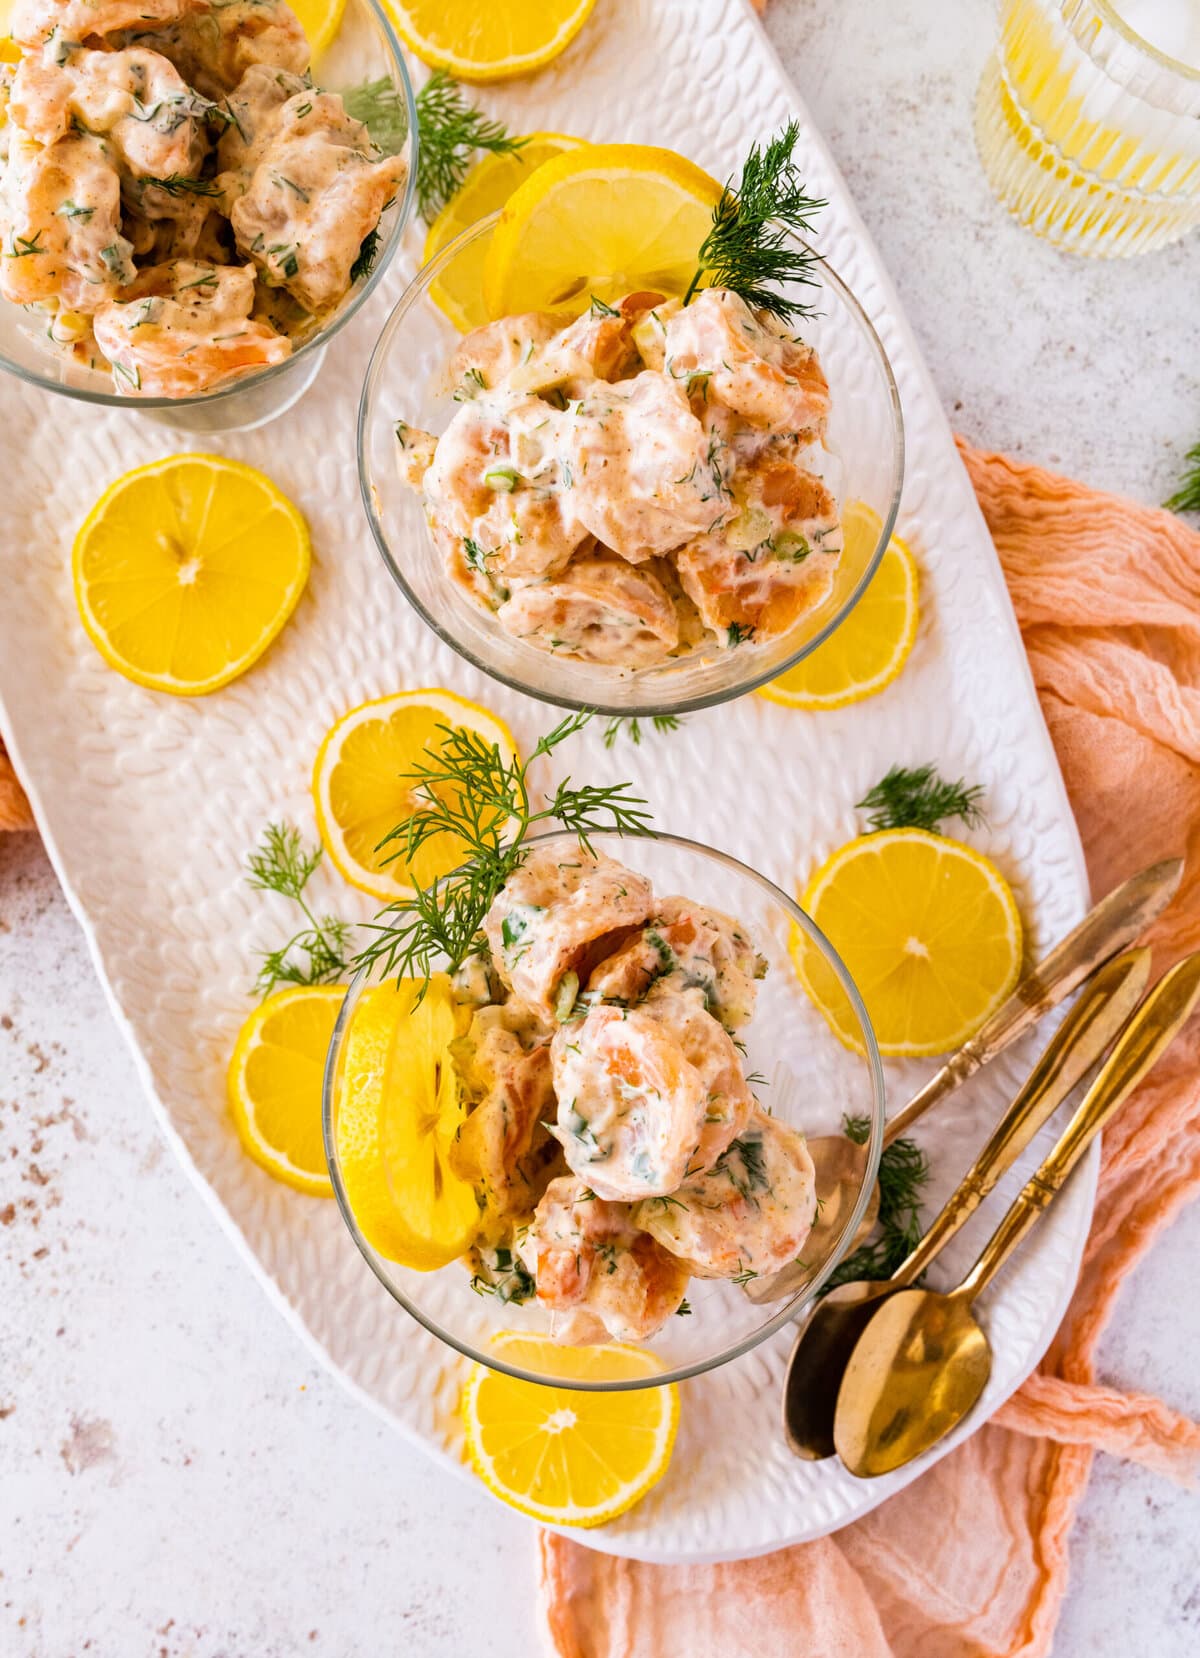 easy shrimp salad recipe in a small clear serving class with lemon and dill as decoration.